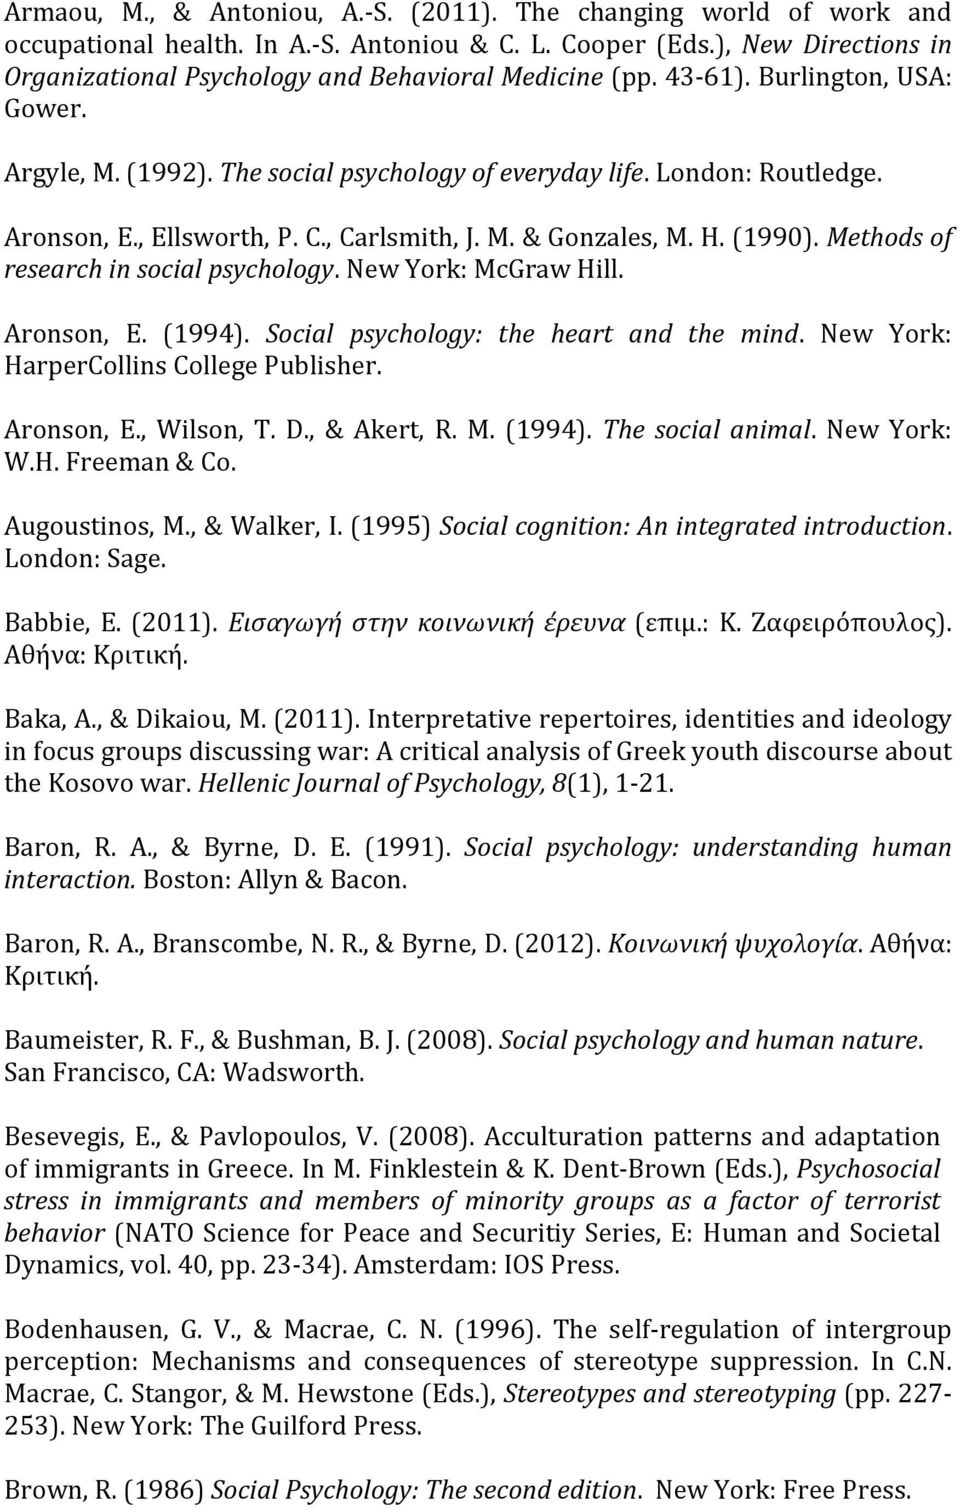 , Ellsworth, P. C., Carlsmith, J. M. & Gonzales, M. H. (1990). Methods of research in social psychology. New York: McGraw Hill. Aronson, E. (1994). Social psychology: the heart and the mind.